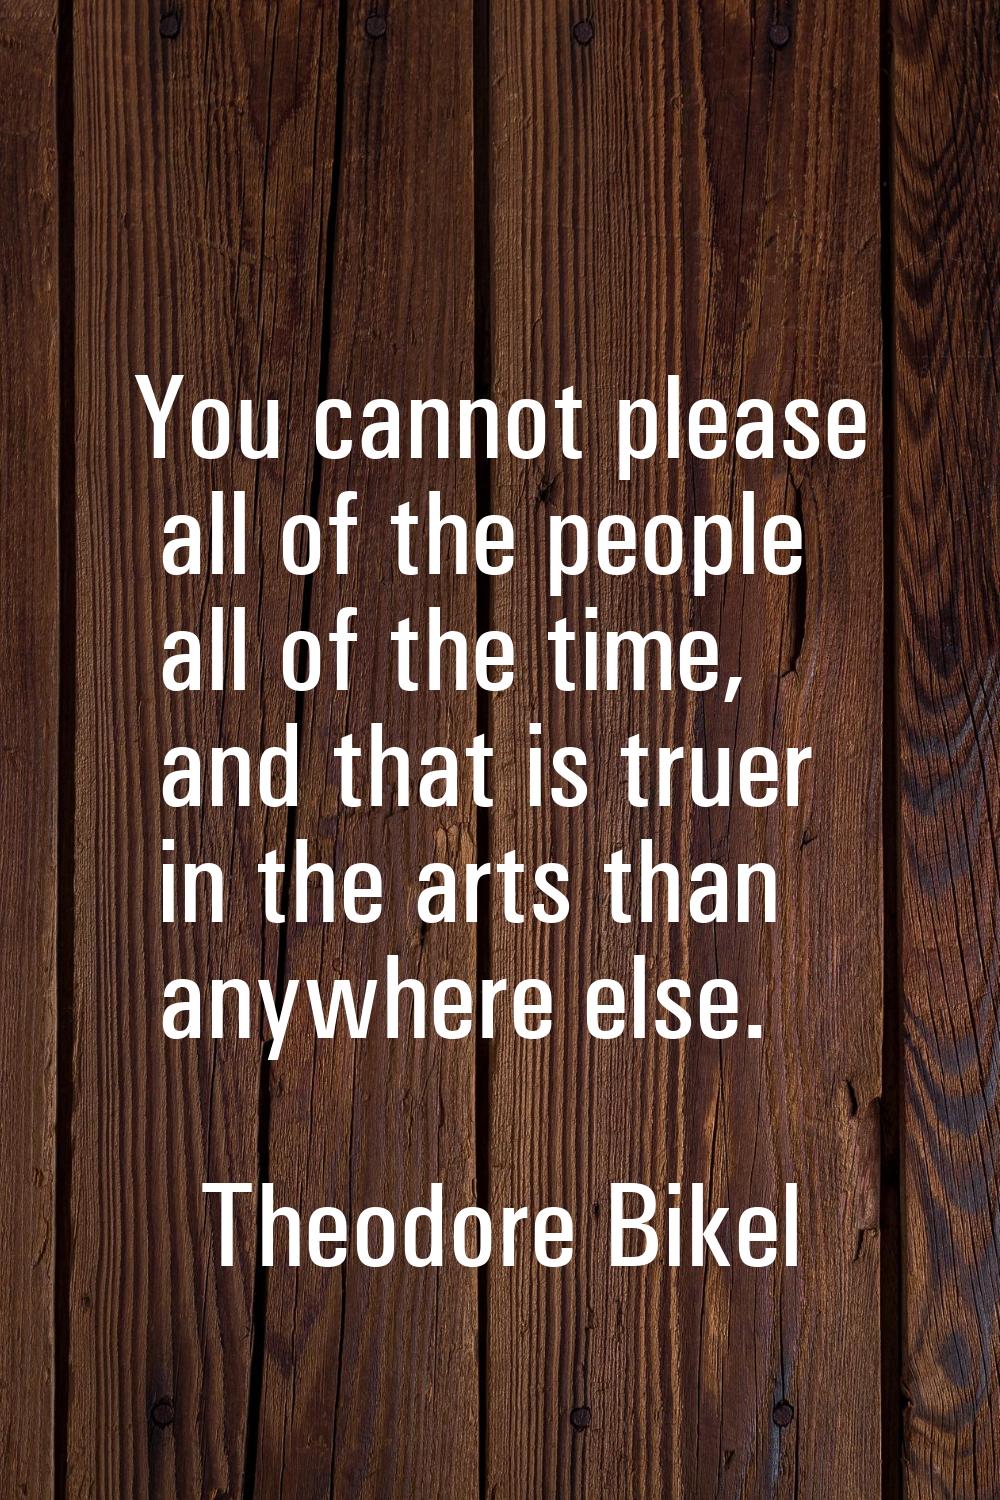 You cannot please all of the people all of the time, and that is truer in the arts than anywhere el